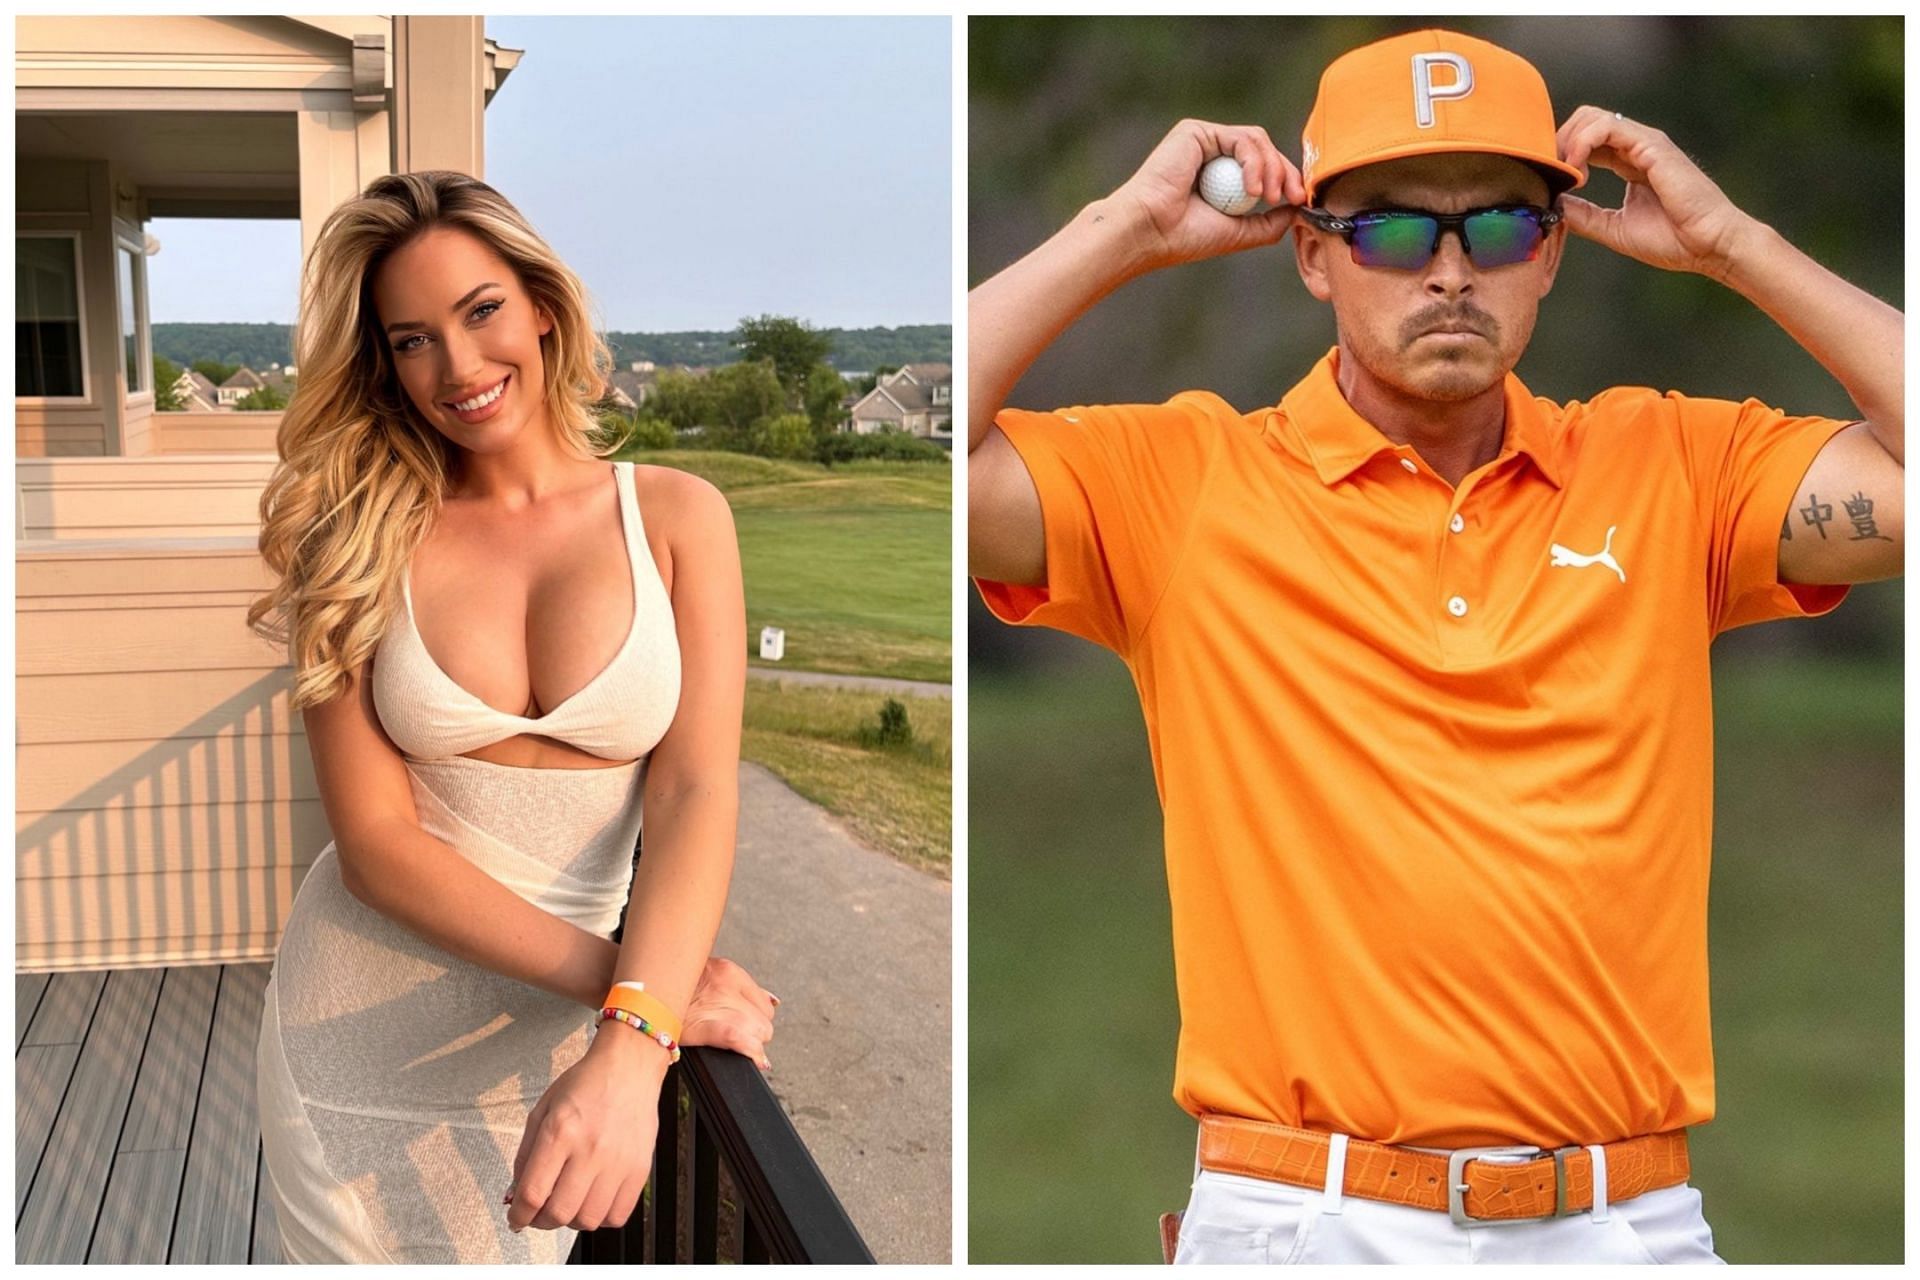 Paige Spiranac and Rickie Fowler were involved in yet another fake tweet 